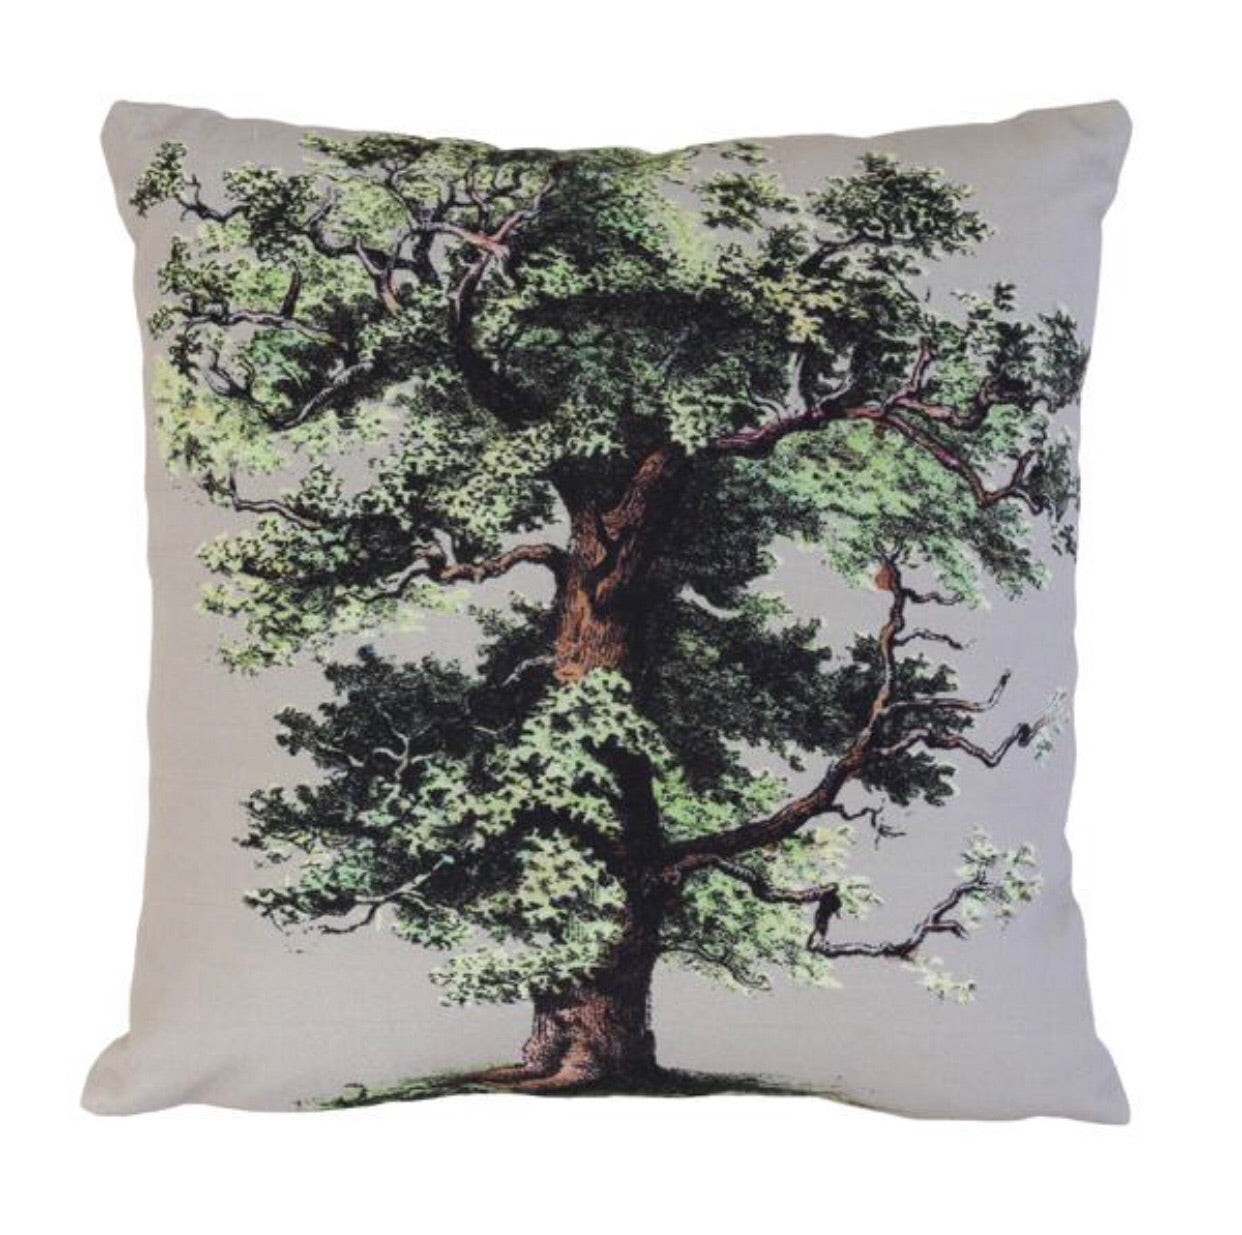 high quality cotton pillow with image of a large oak tree